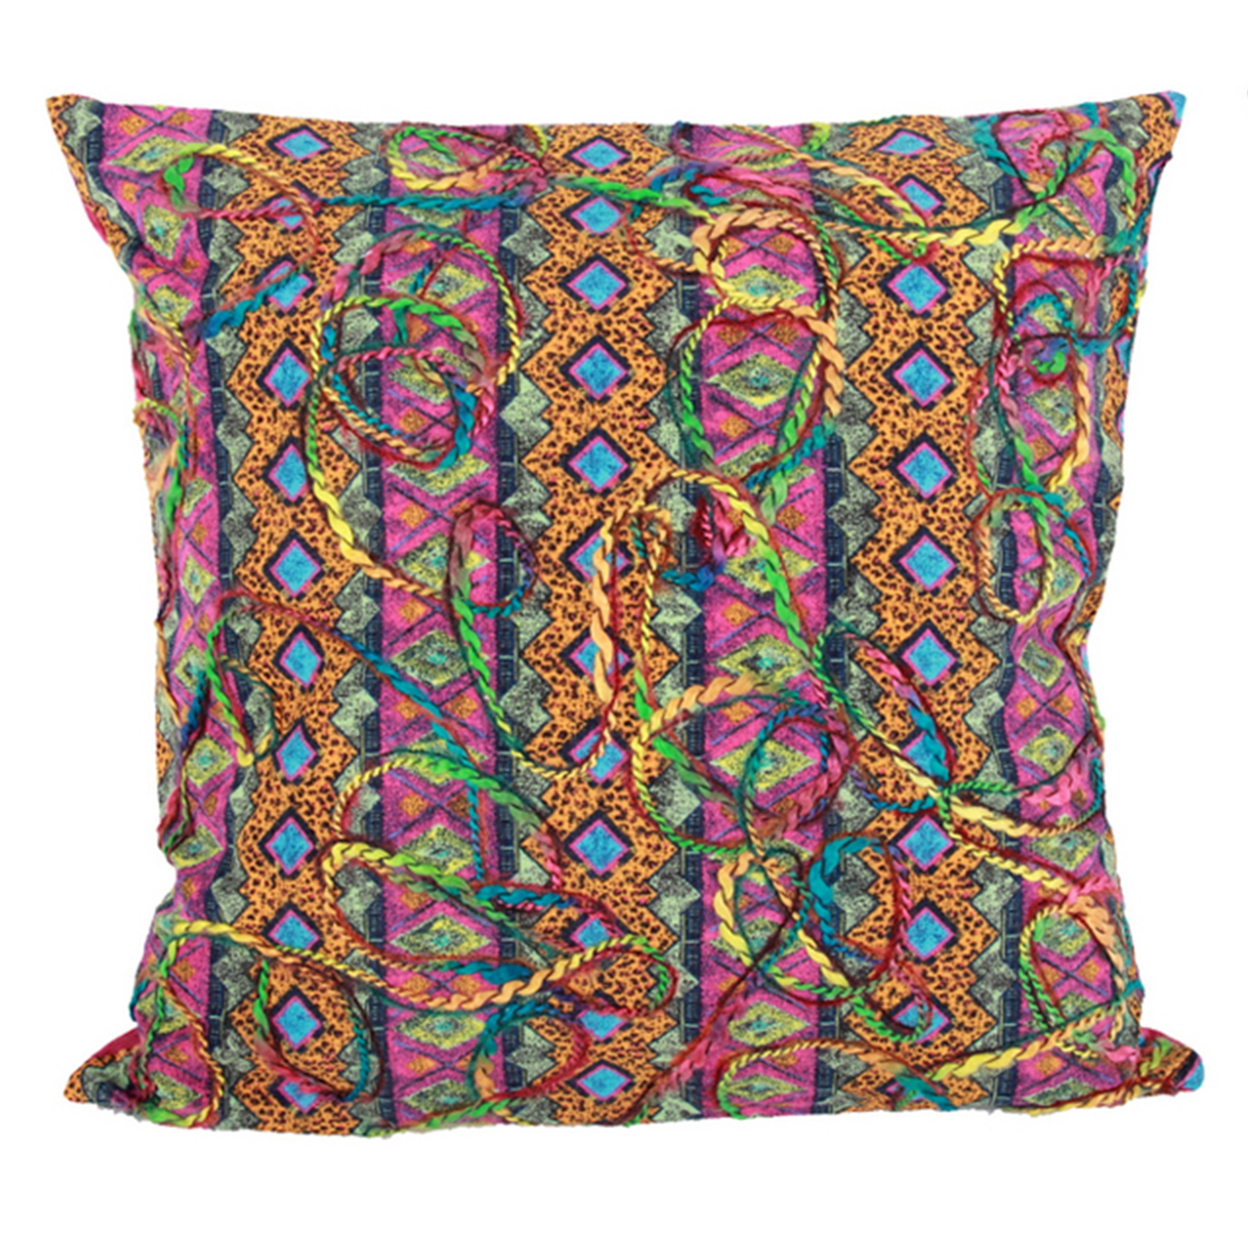 20 X 20 Inch Polyester Pillow With Intricate Embroidery, Set Of 2, Multicolor- Saltoro Sherpi